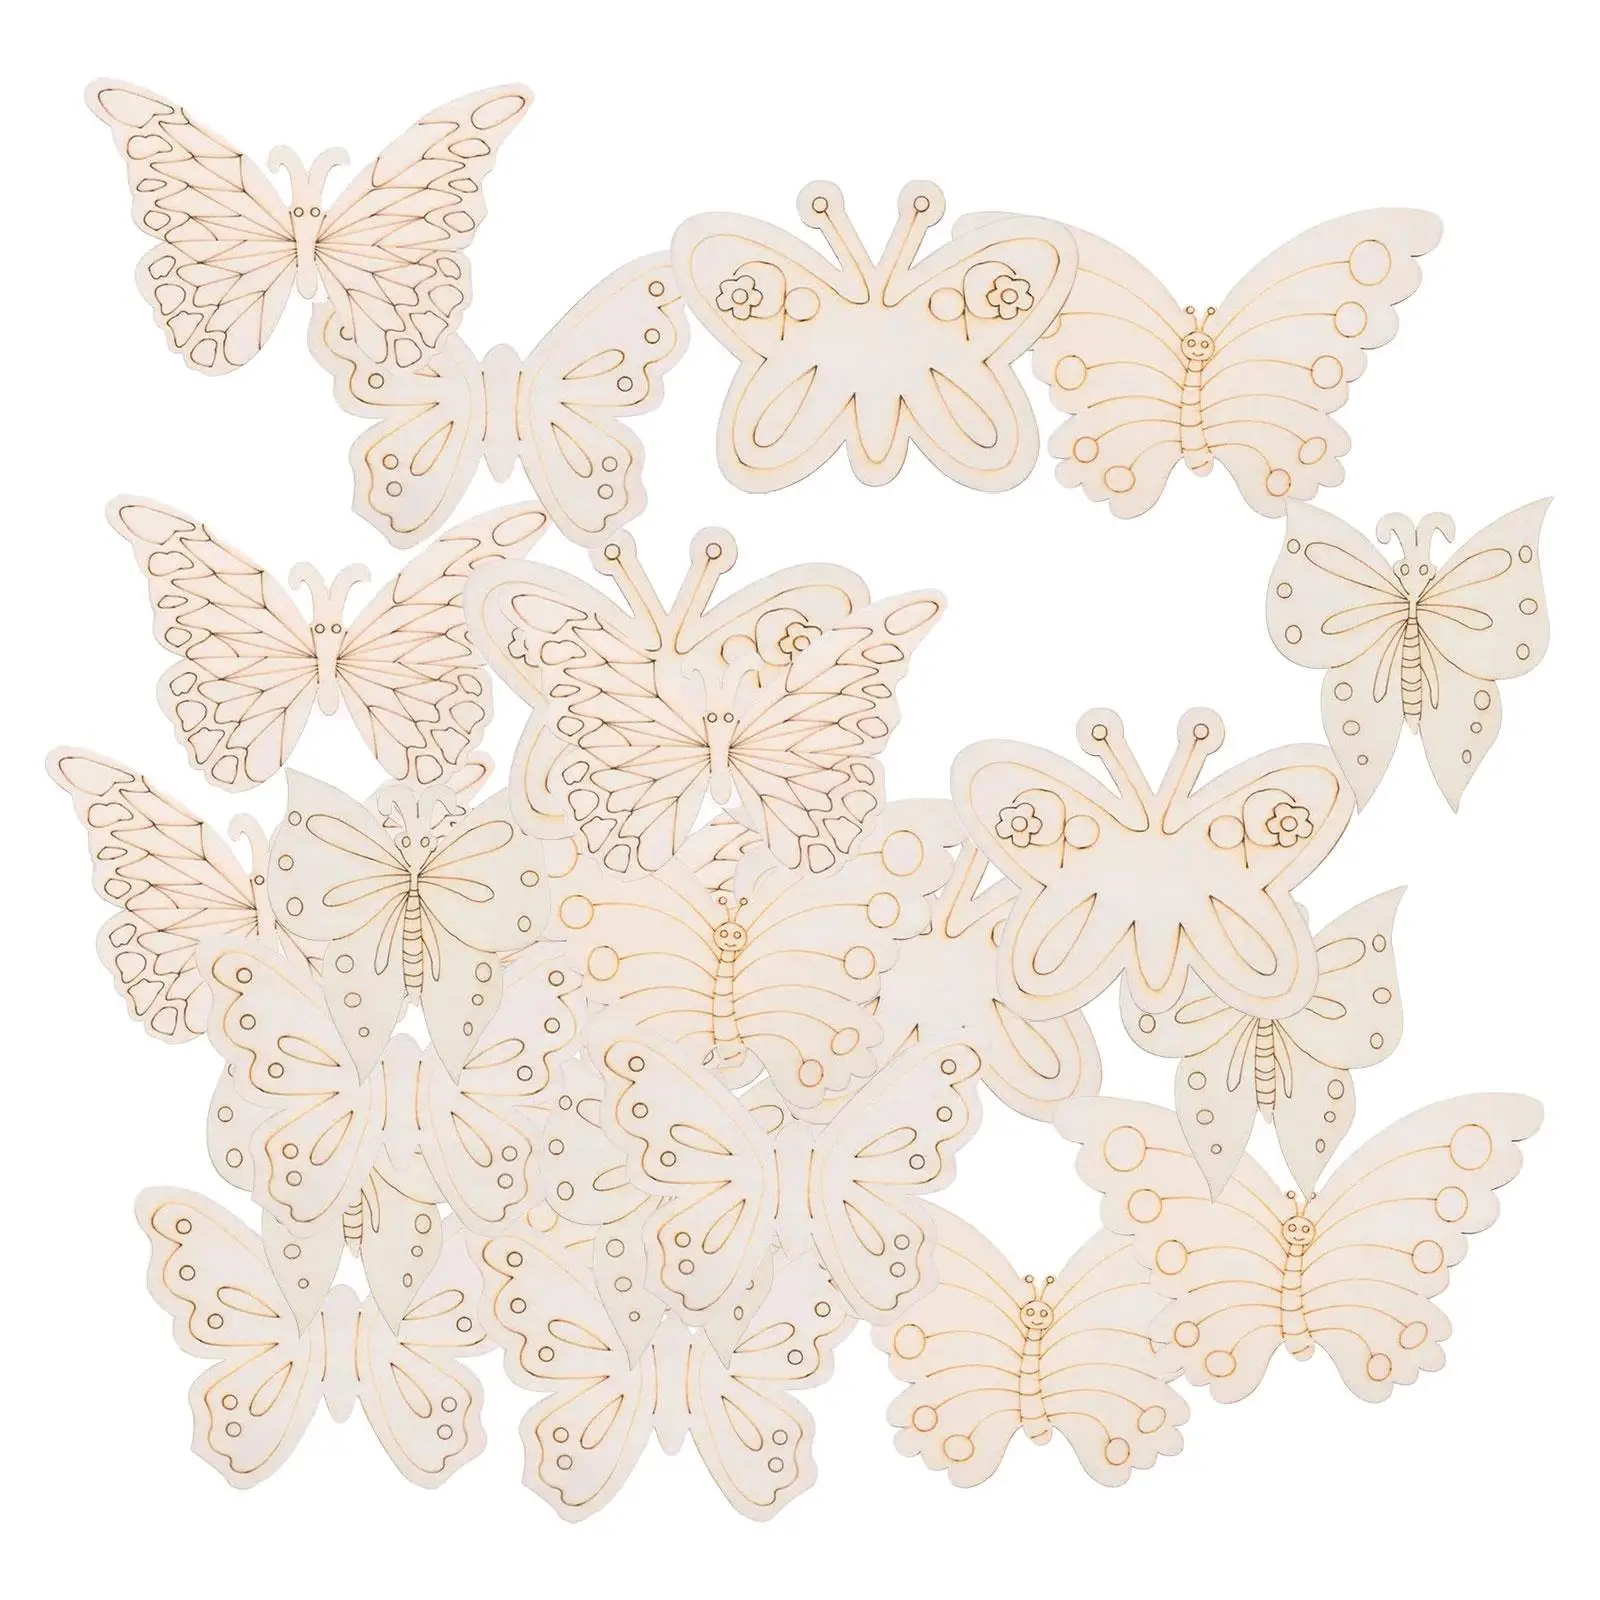 25x Wooden Butterfly Cutouts Wooden Pieces Ornament Butterfly Shaped Wood Slices Wood Chips for DIY Crafts Wedding Home Decor